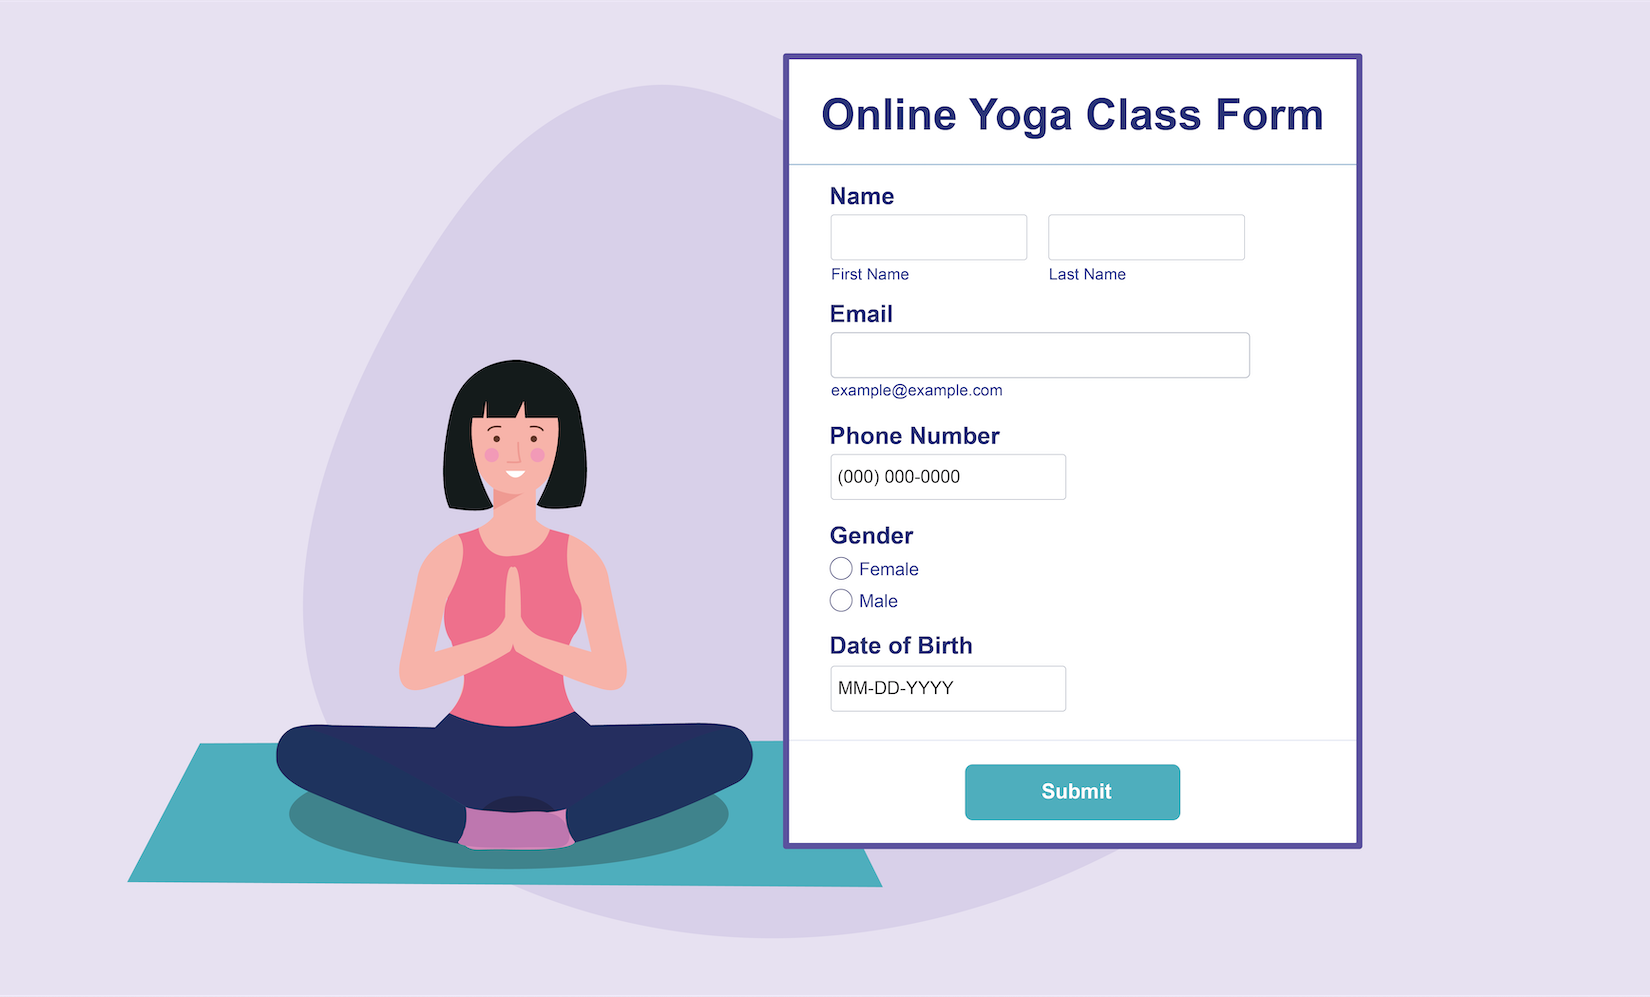 How to charge for online yoga classes